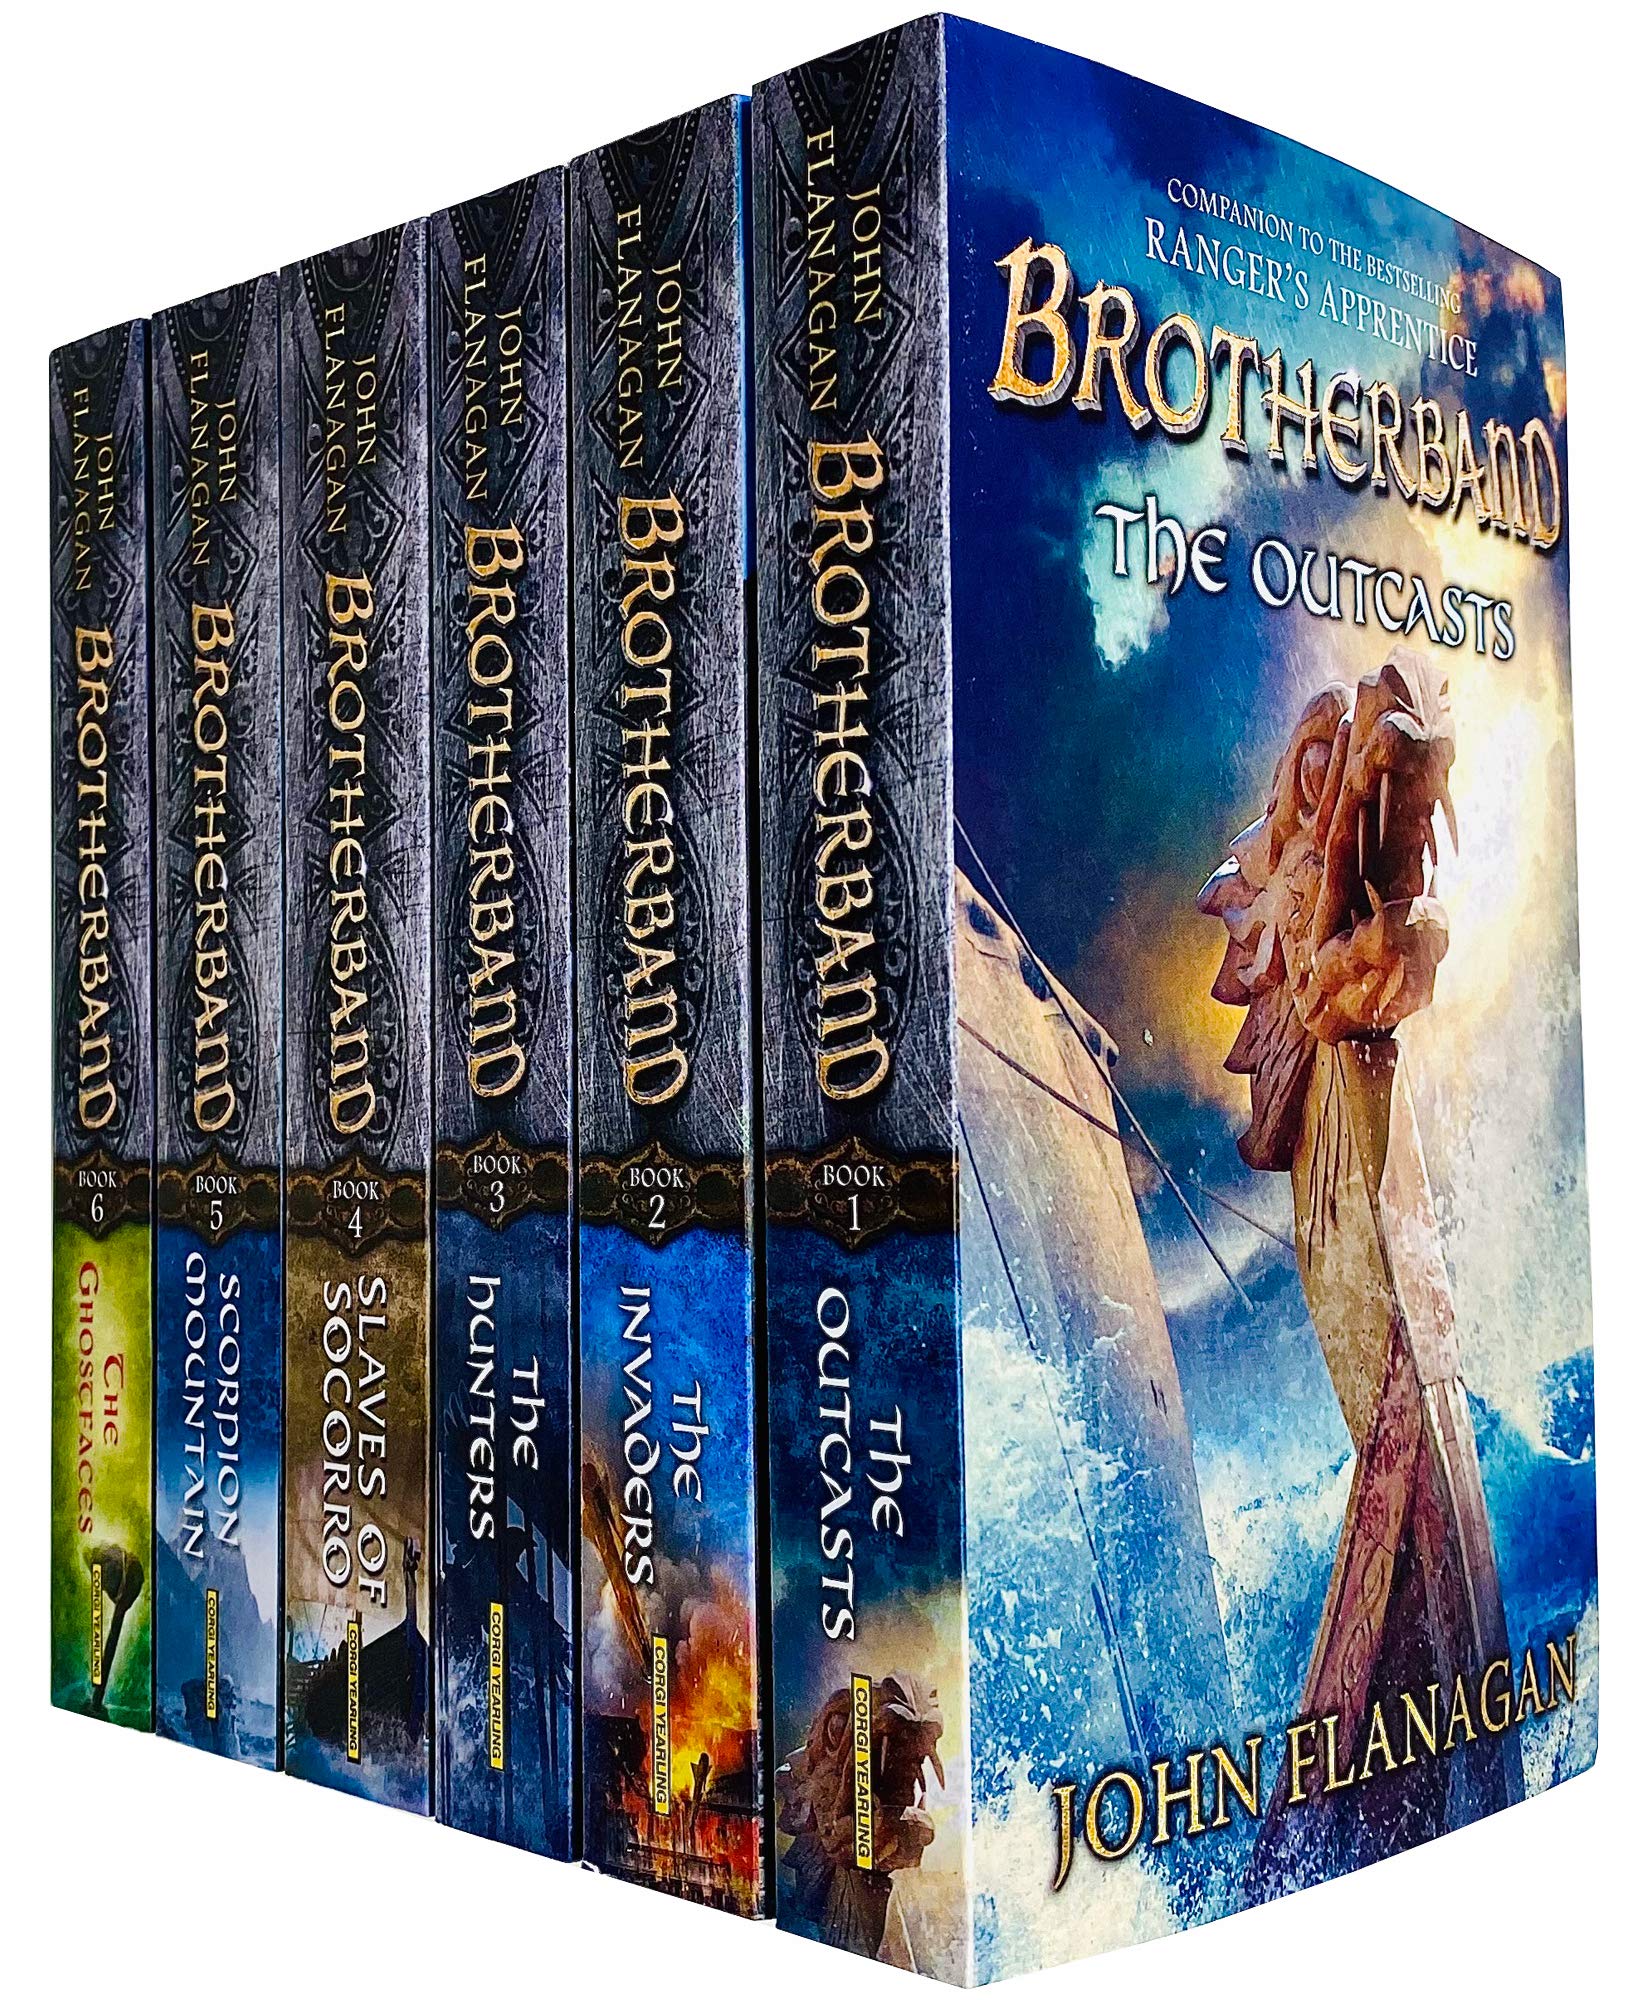 Brotherband Chronicles Series 6 Books Collection Set by John Flanagan Paperback - Lets Buy Books